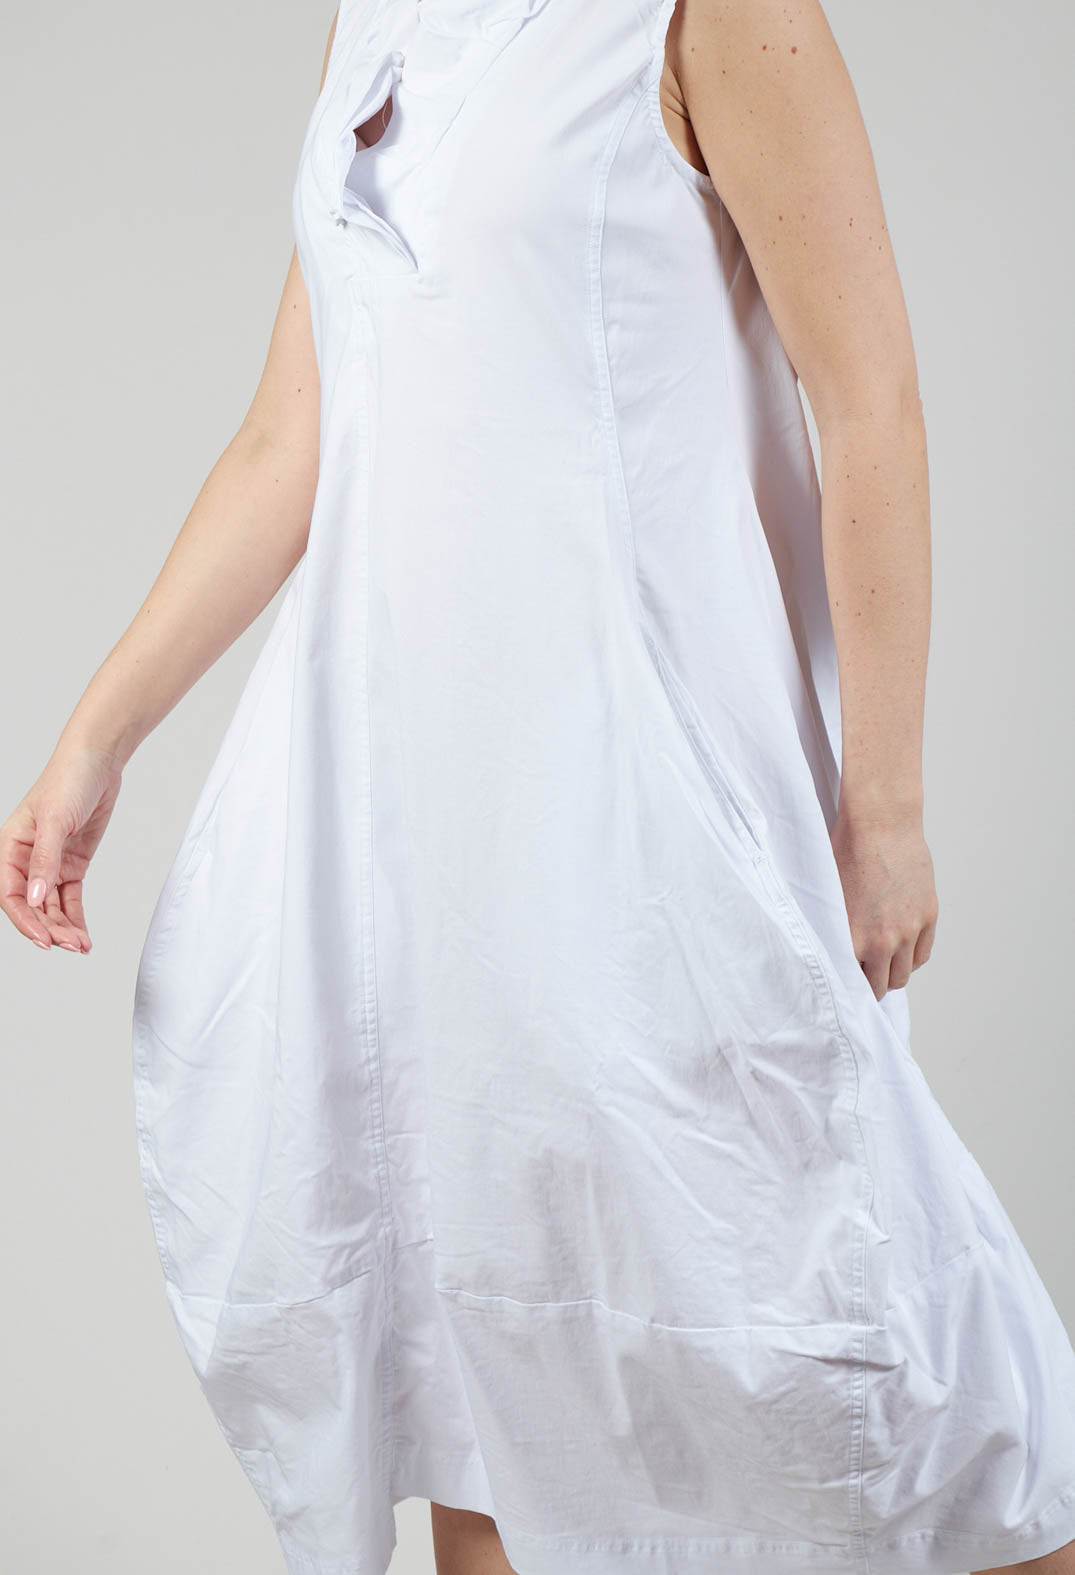 Sleeveless Dress with Feature Neckline in White